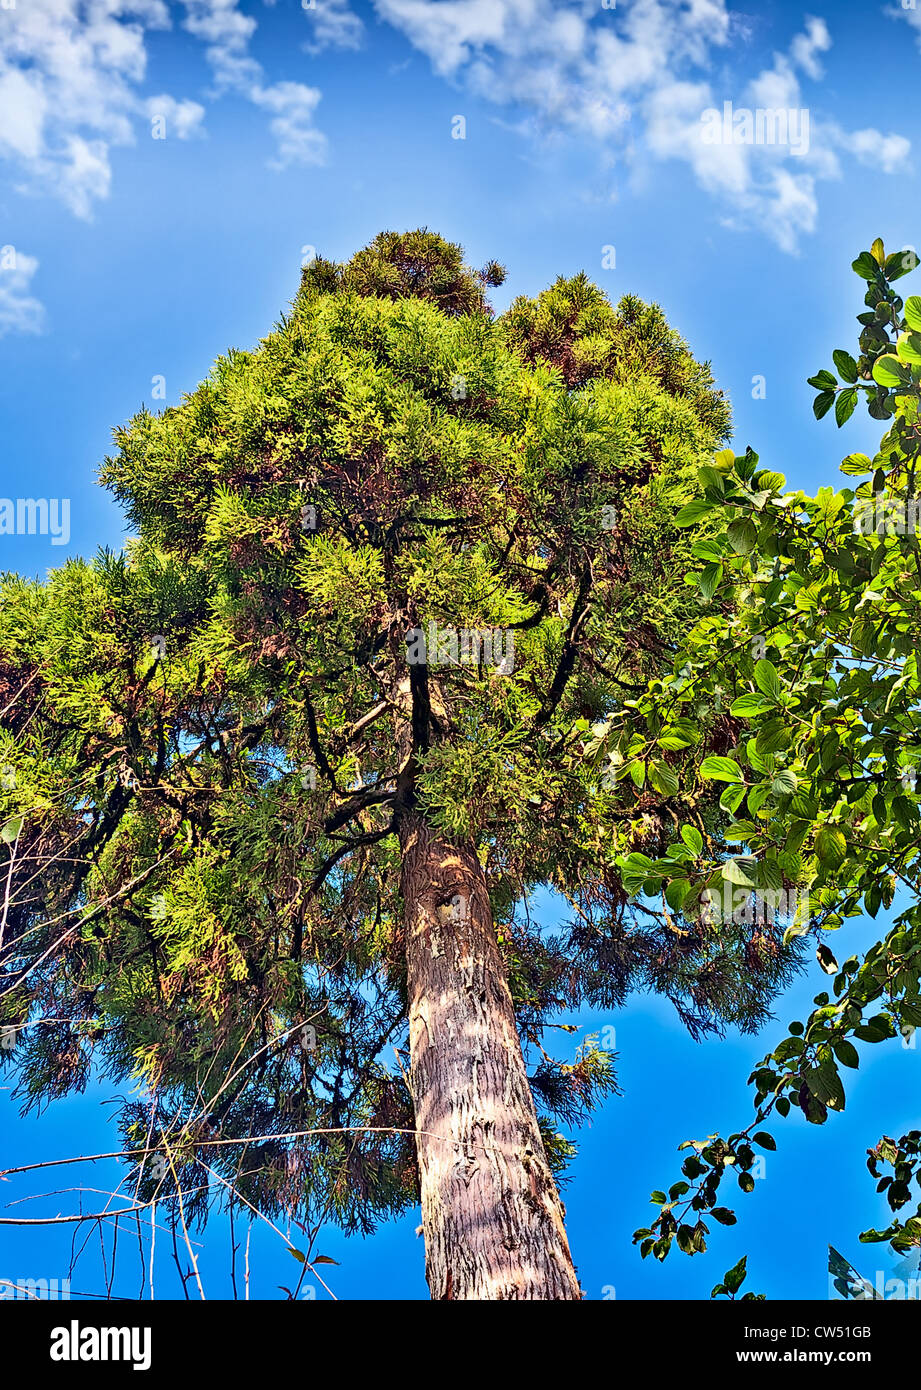 Tall green pine tree in the backdrop of blue sky and white fluffy clouds, saturated, nature, Darjeeling, Stock Photo